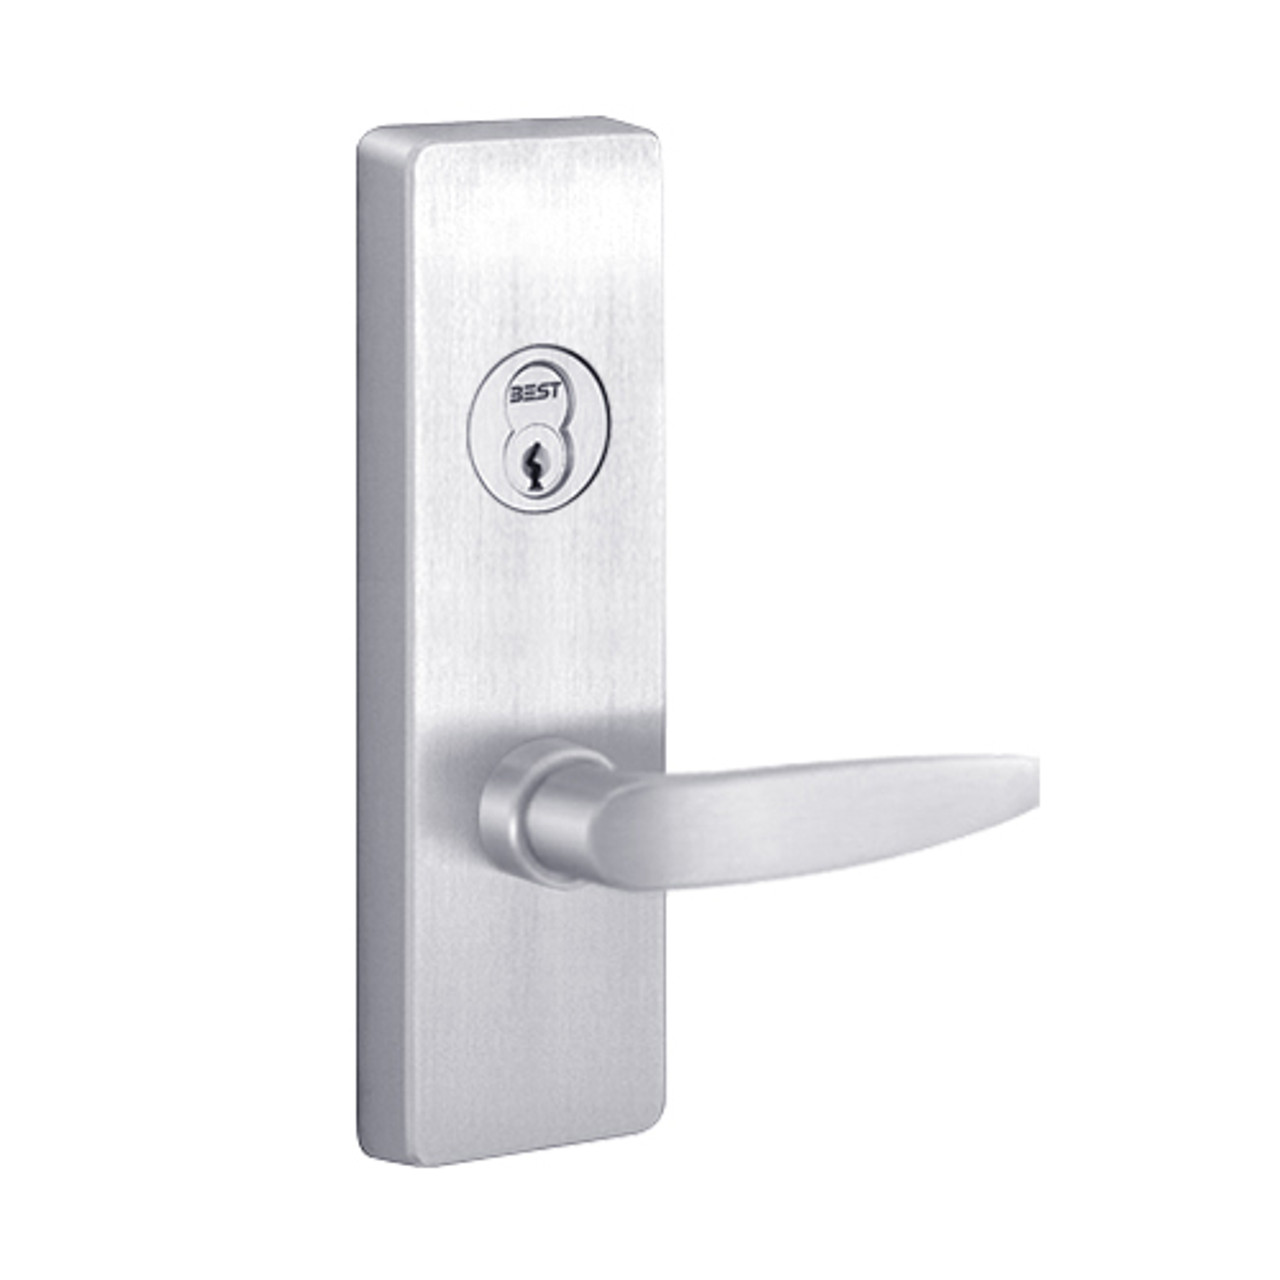 RVM4908B-625-LHR PHI Key Controls Lever Vandal Resistant Retrofit Trim with B Lever Design for Apex and Olympian Series Exit Device in Bright Chrome Finish